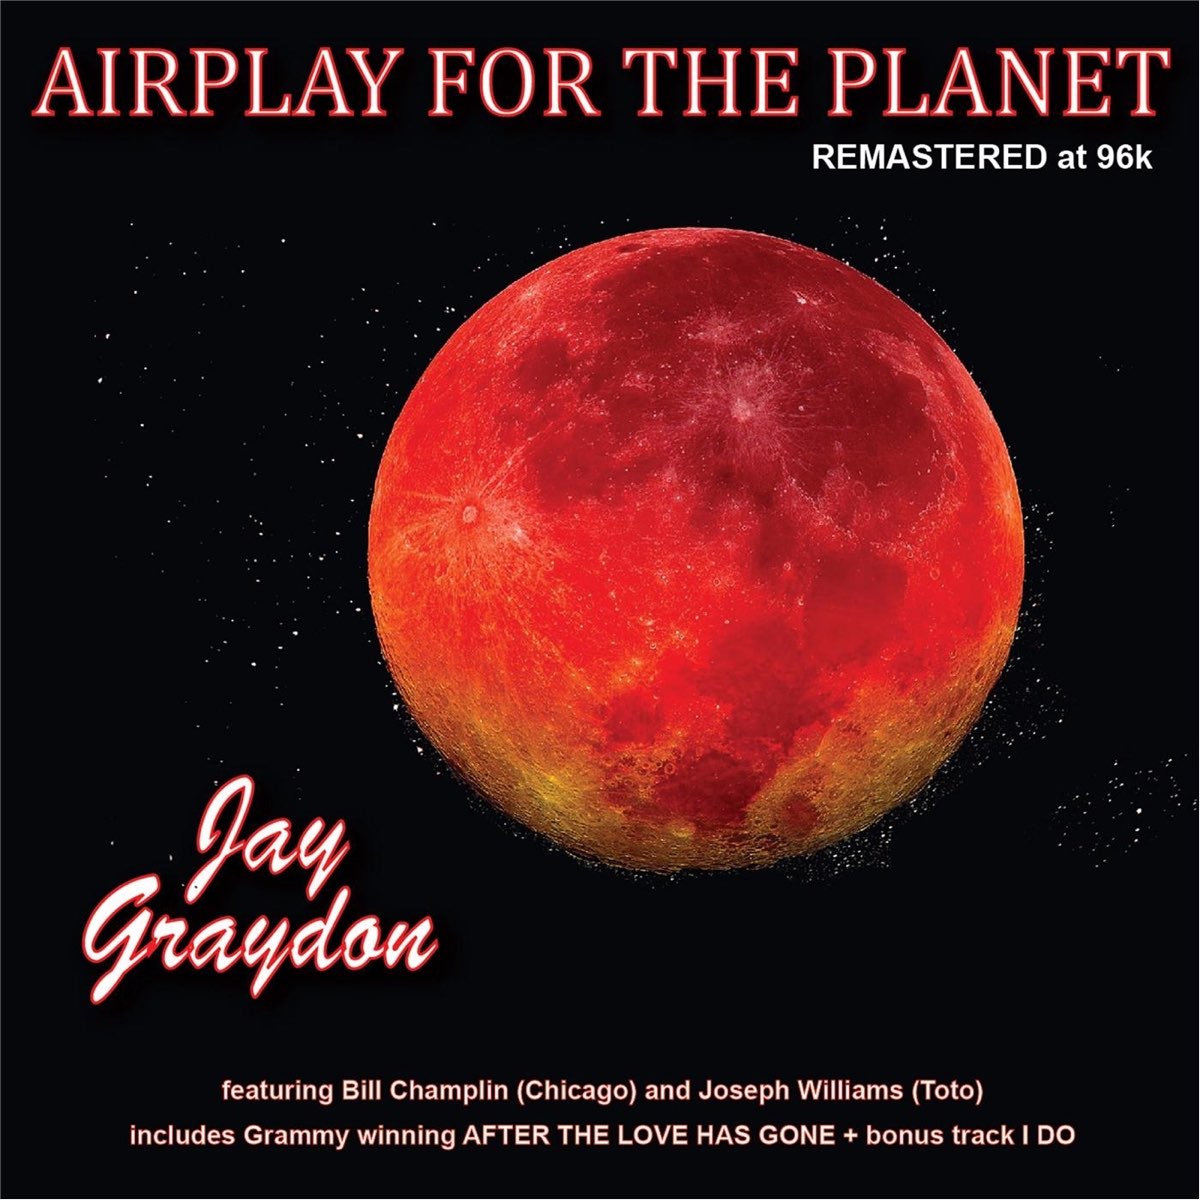 ‎Airplay for the Planet (Remastered) de Jay Graydon en Apple Music